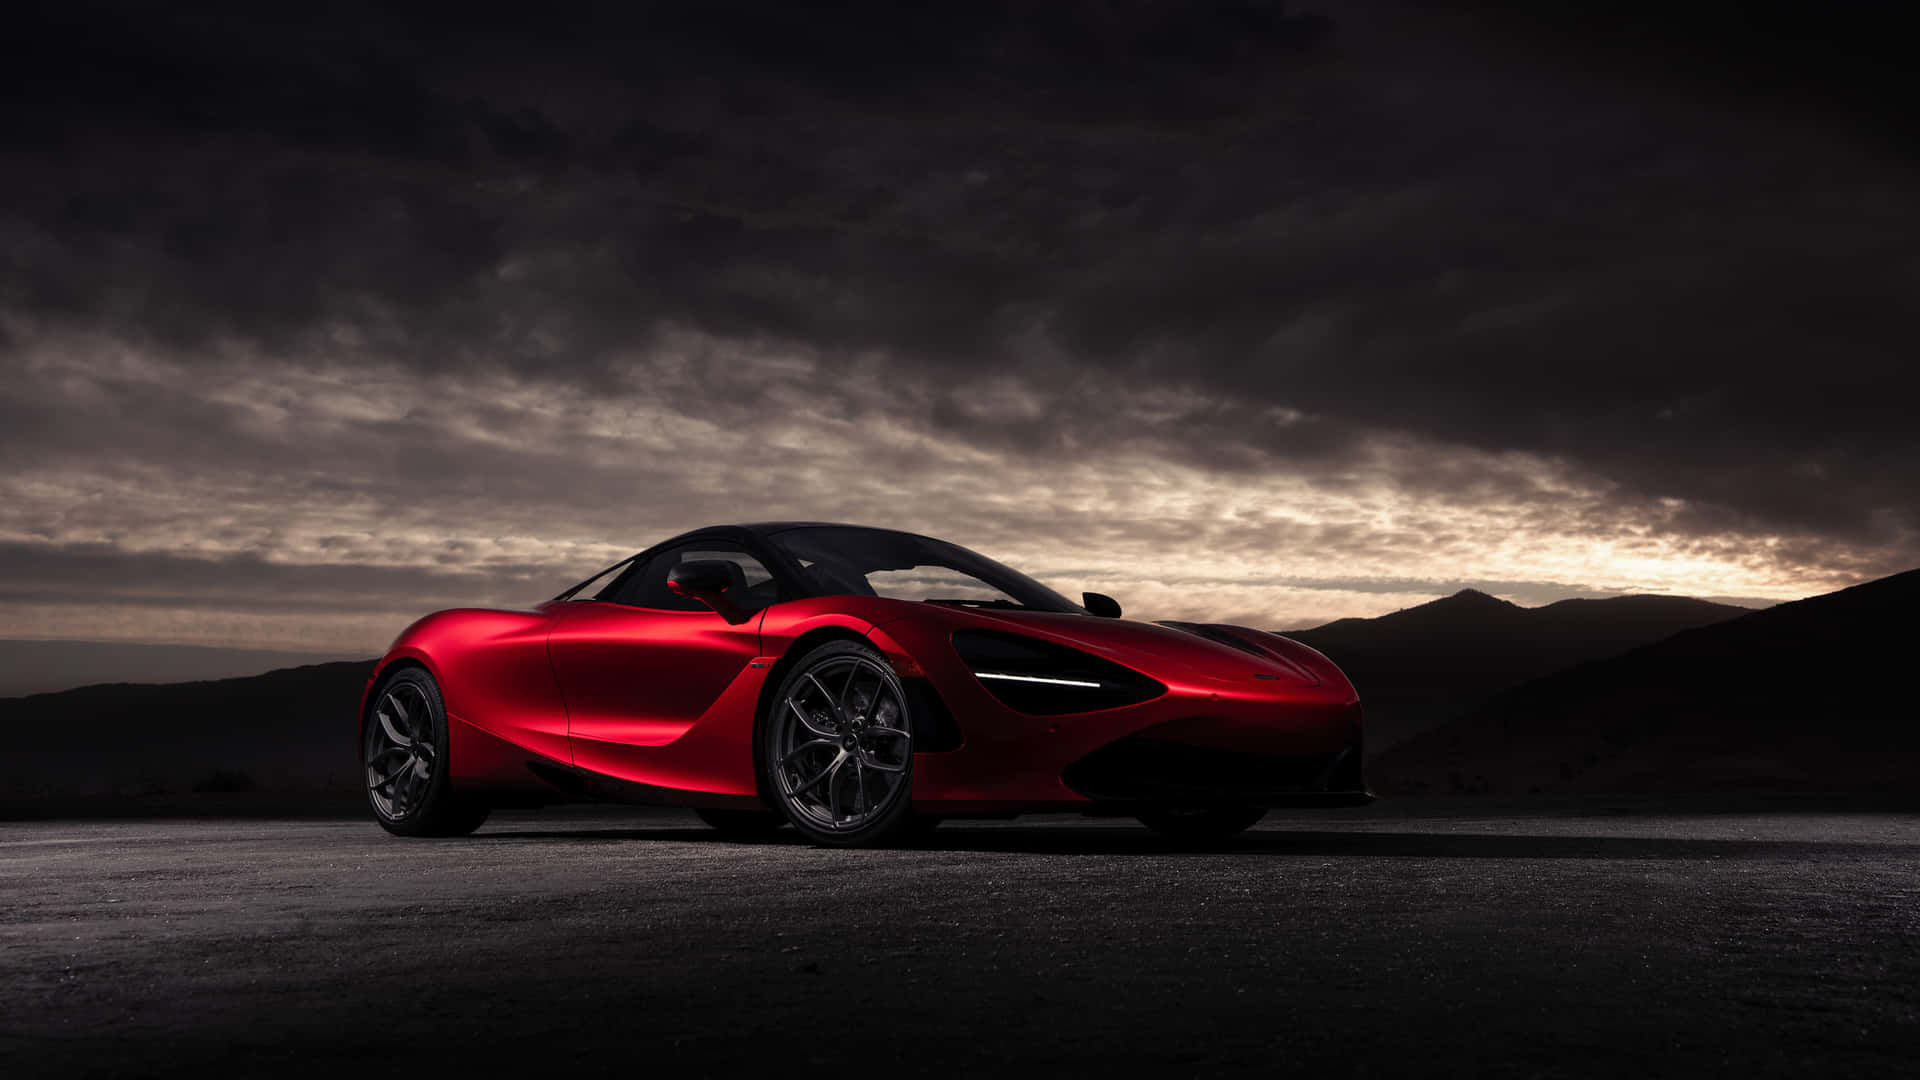 A Red Sports Car Is Parked In The Desert